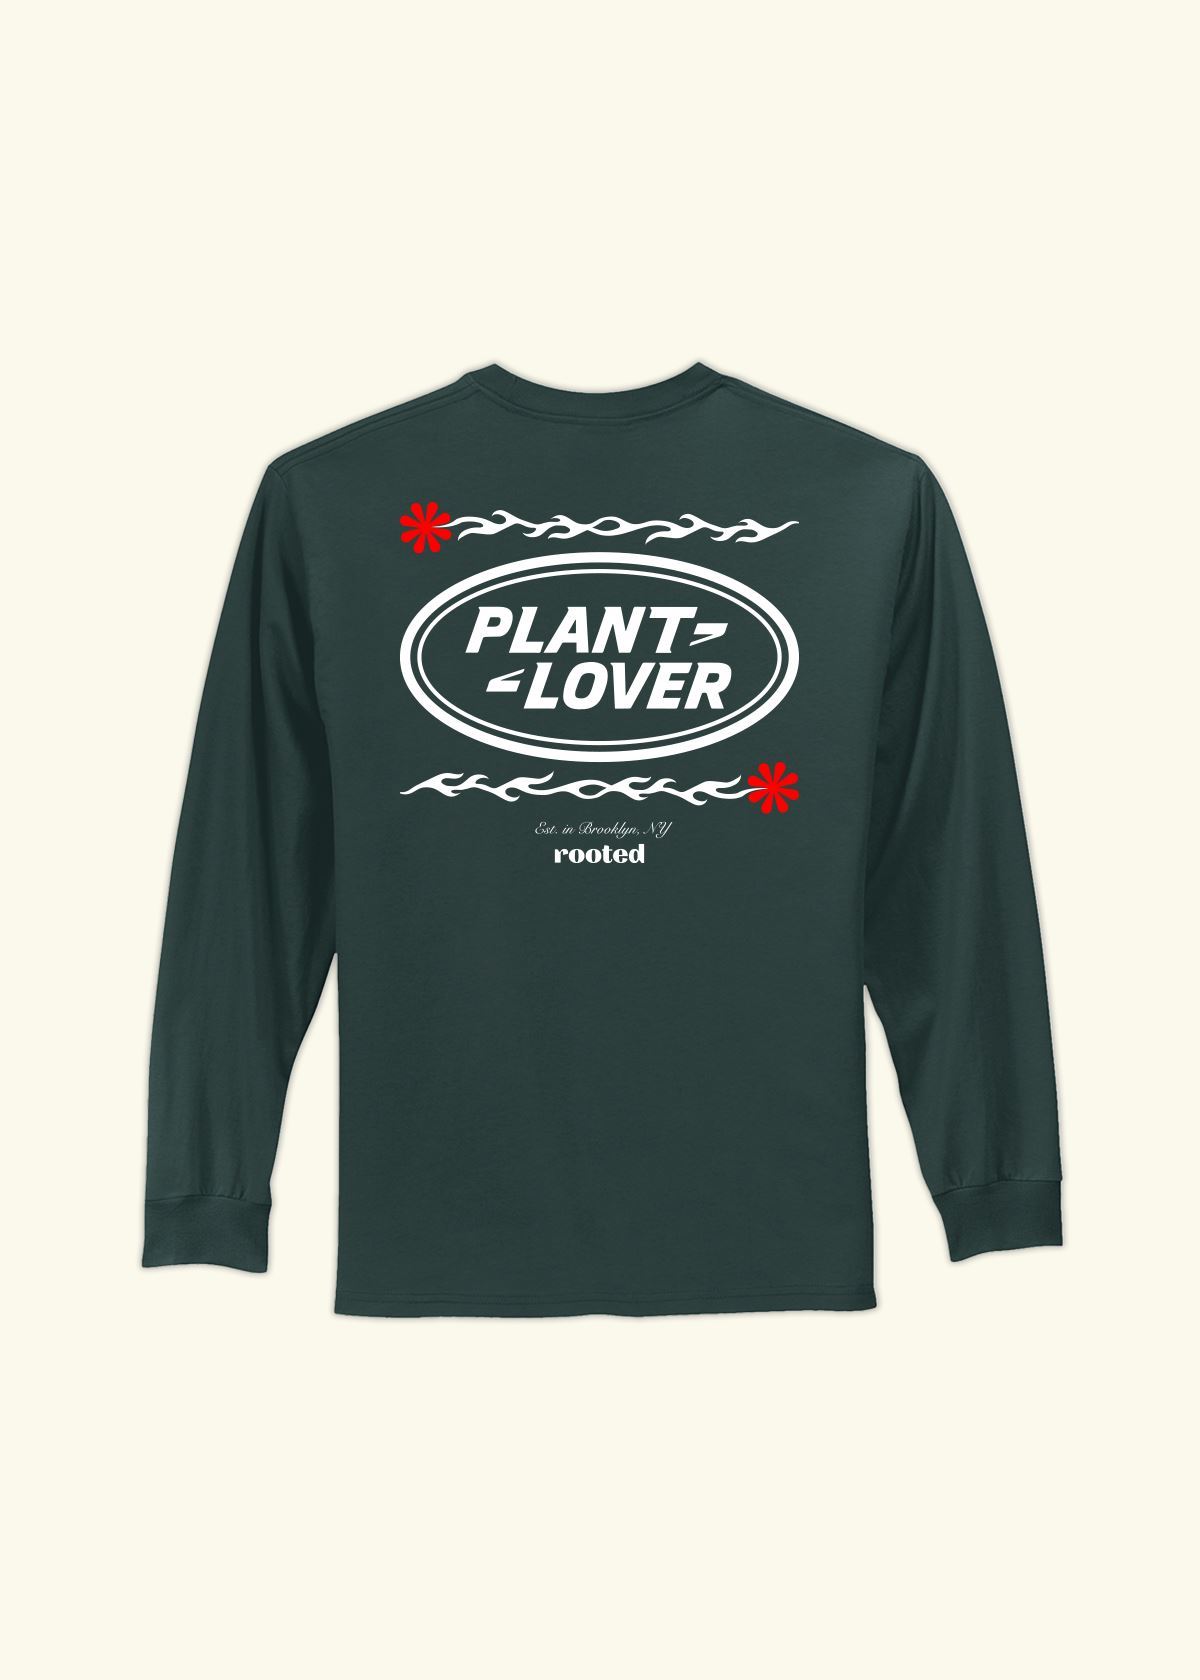 Plant Lover L/S T-Shirt Merchandise Rooted Forest SM 